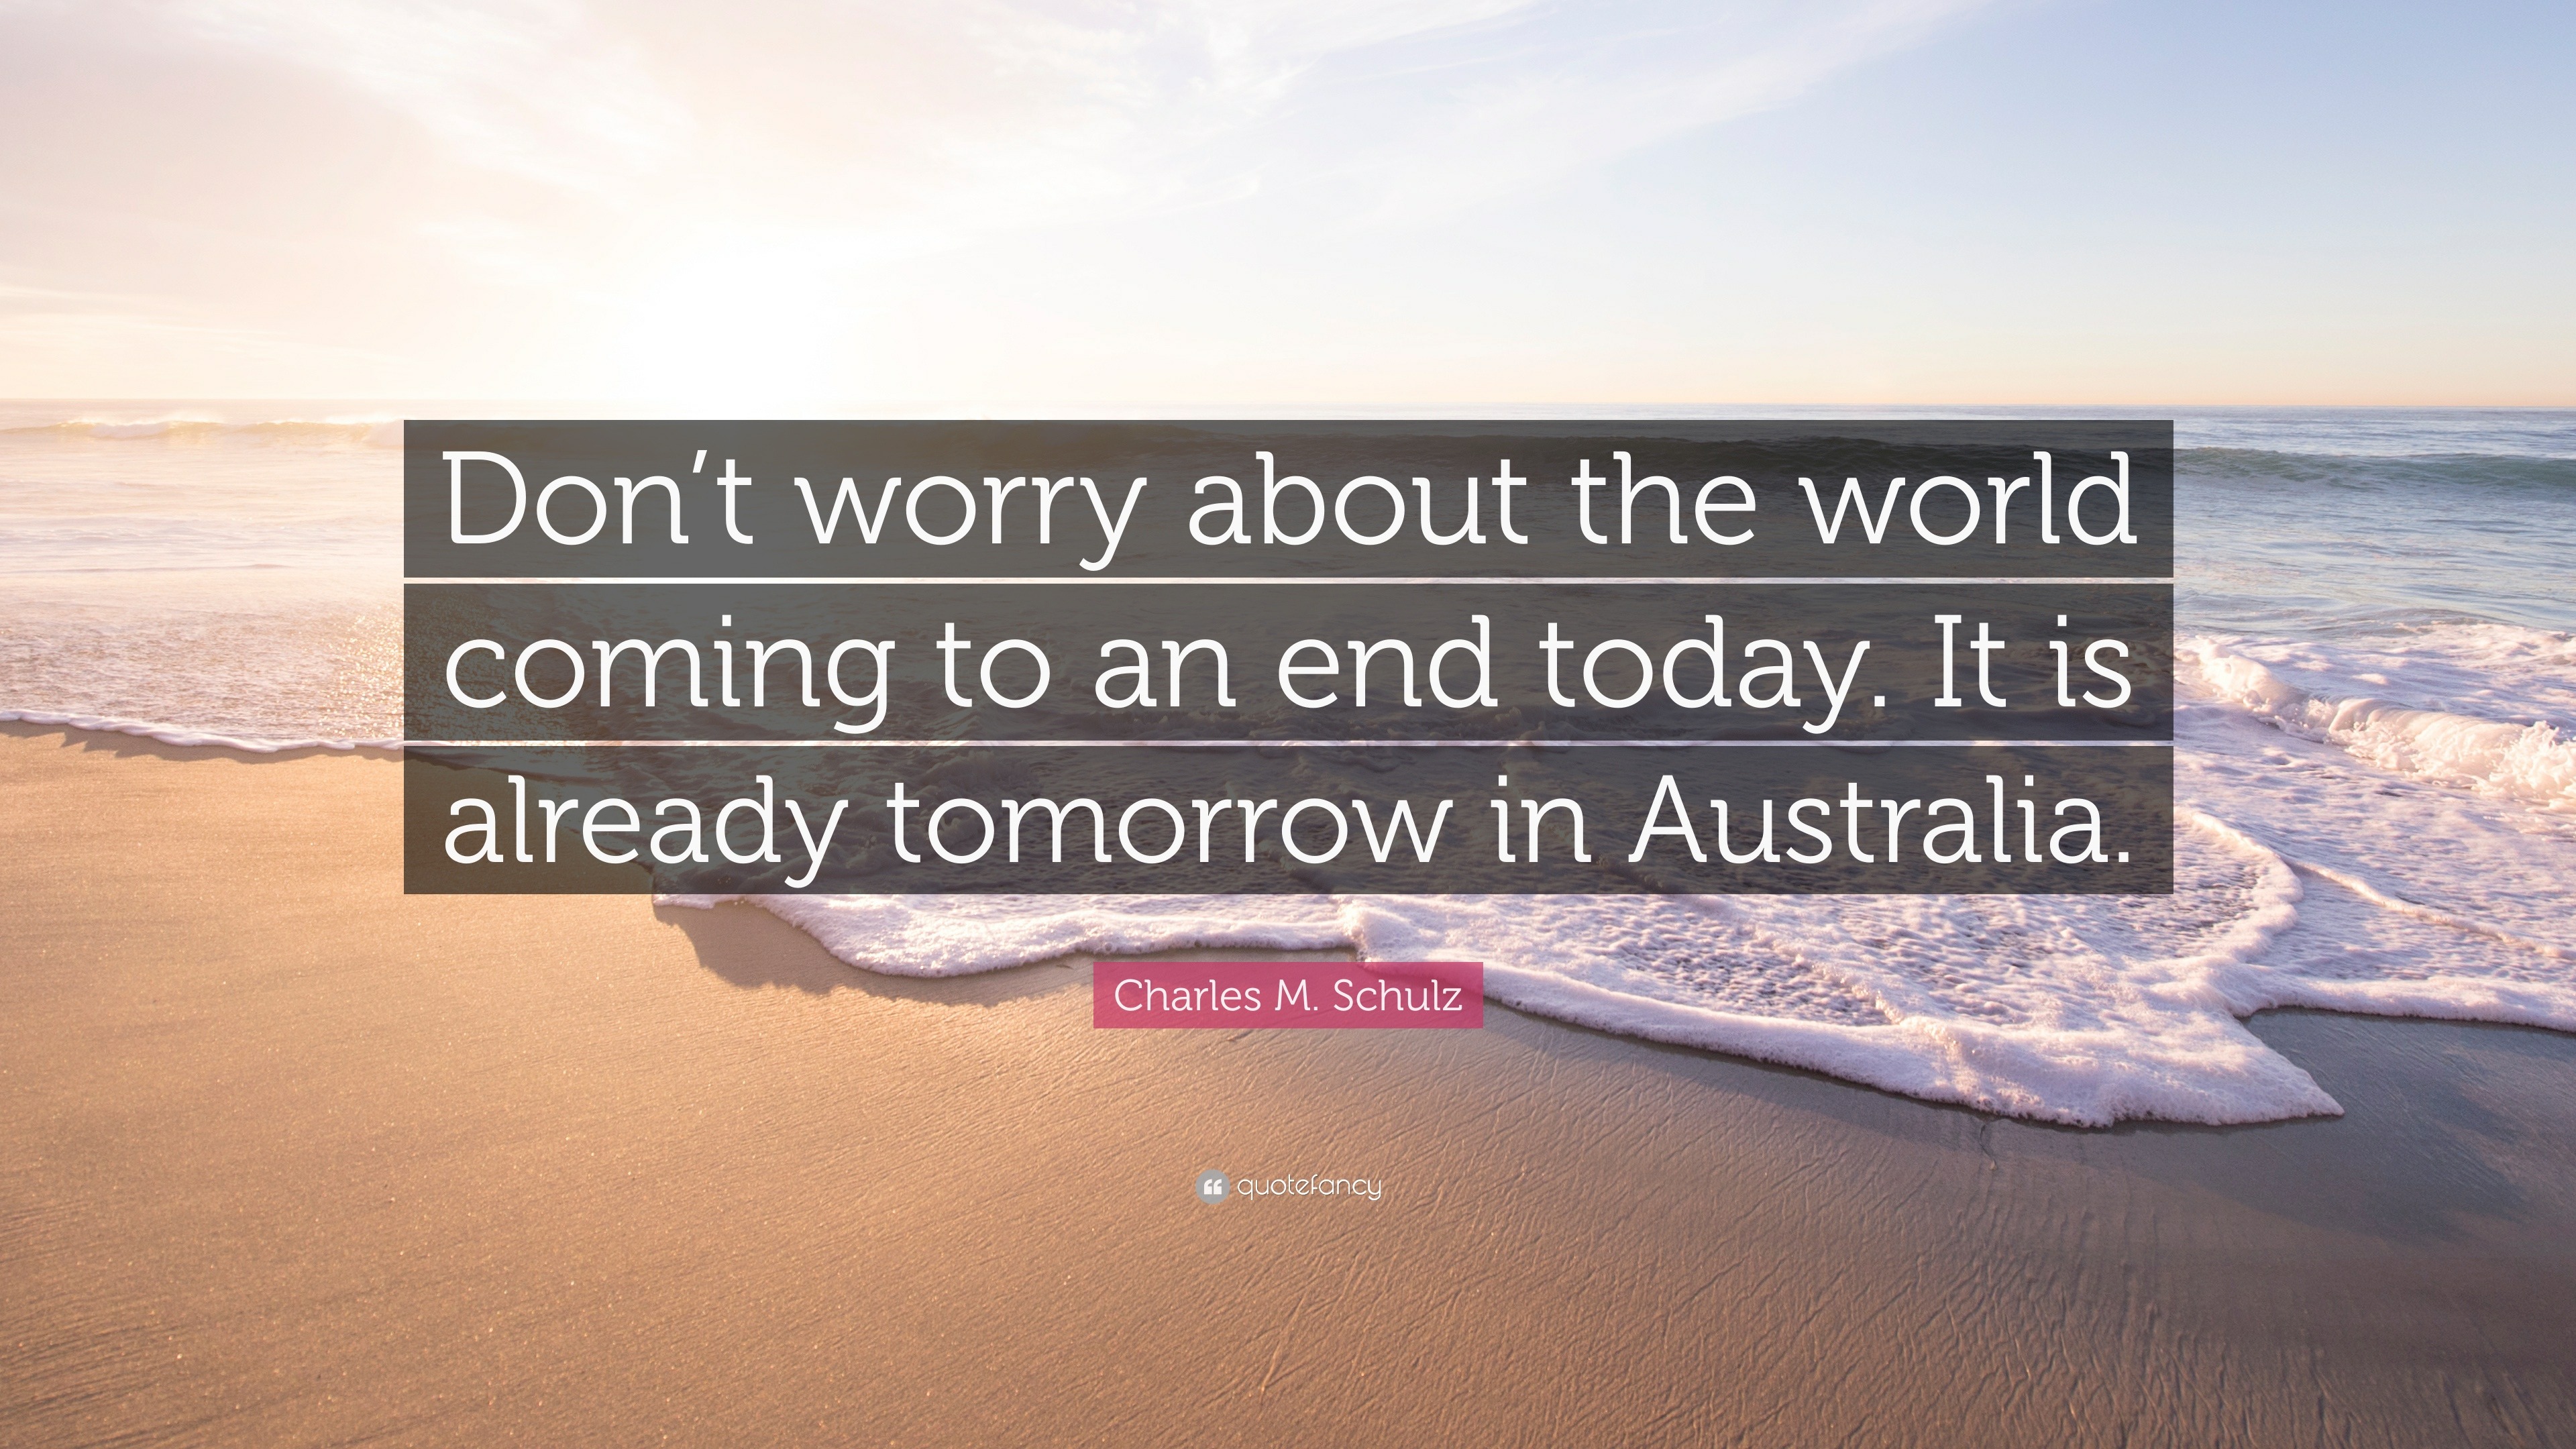 https://quotefancy.com/media/wallpaper/3840x2160/1966546-Charles-M-Schulz-Quote-Don-t-worry-about-the-world-coming-to-an.jpg